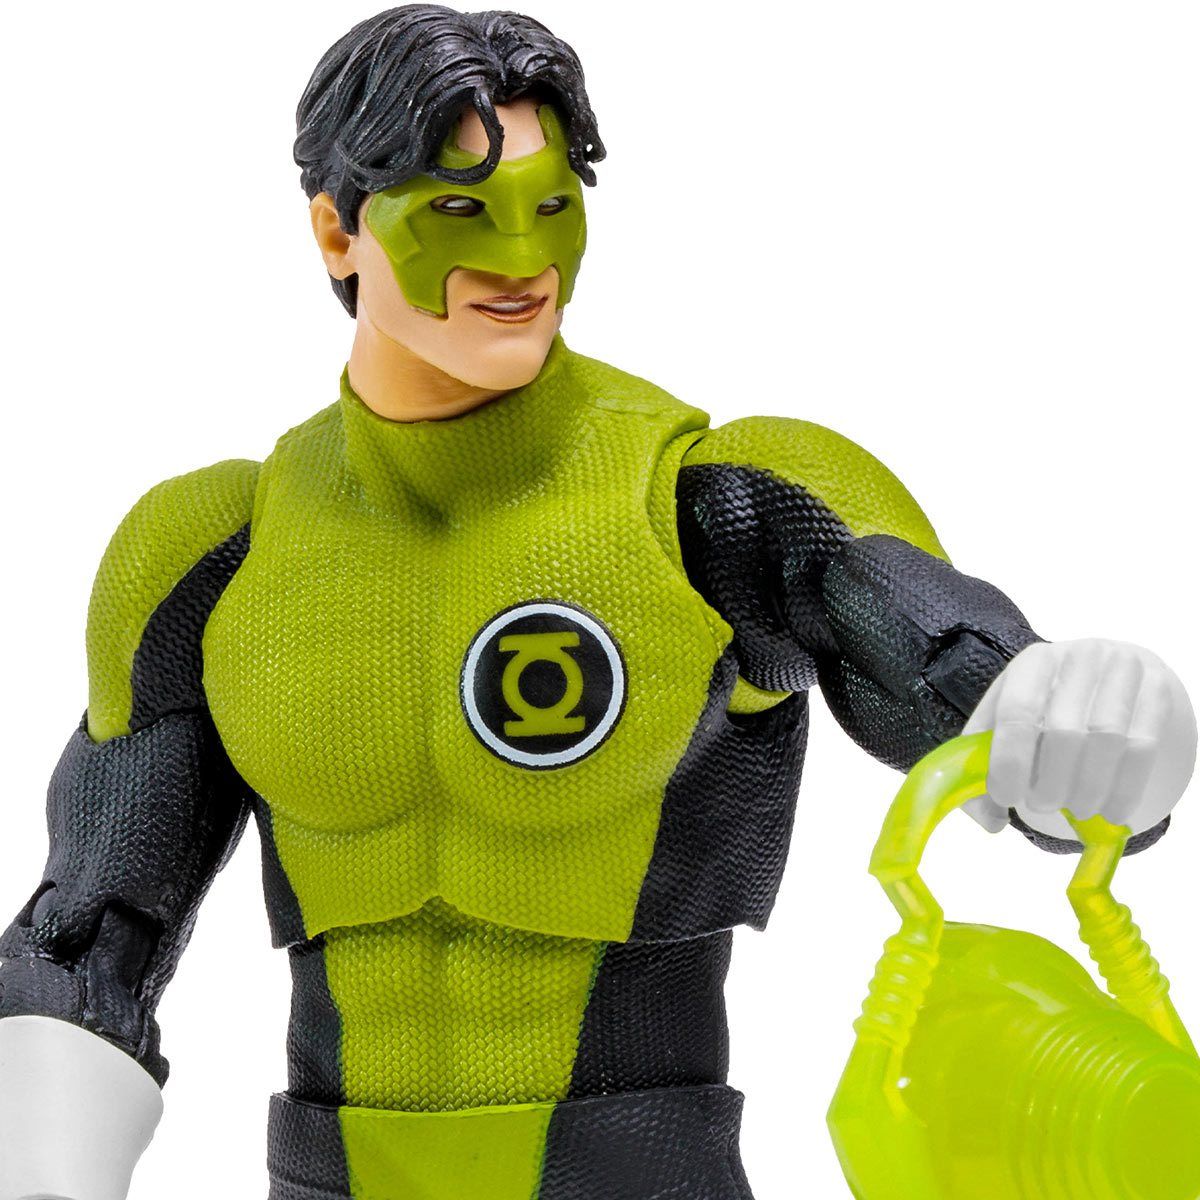 New DC Build-A Wave 8 Blackest Night Figures From McFarlane Are Here!